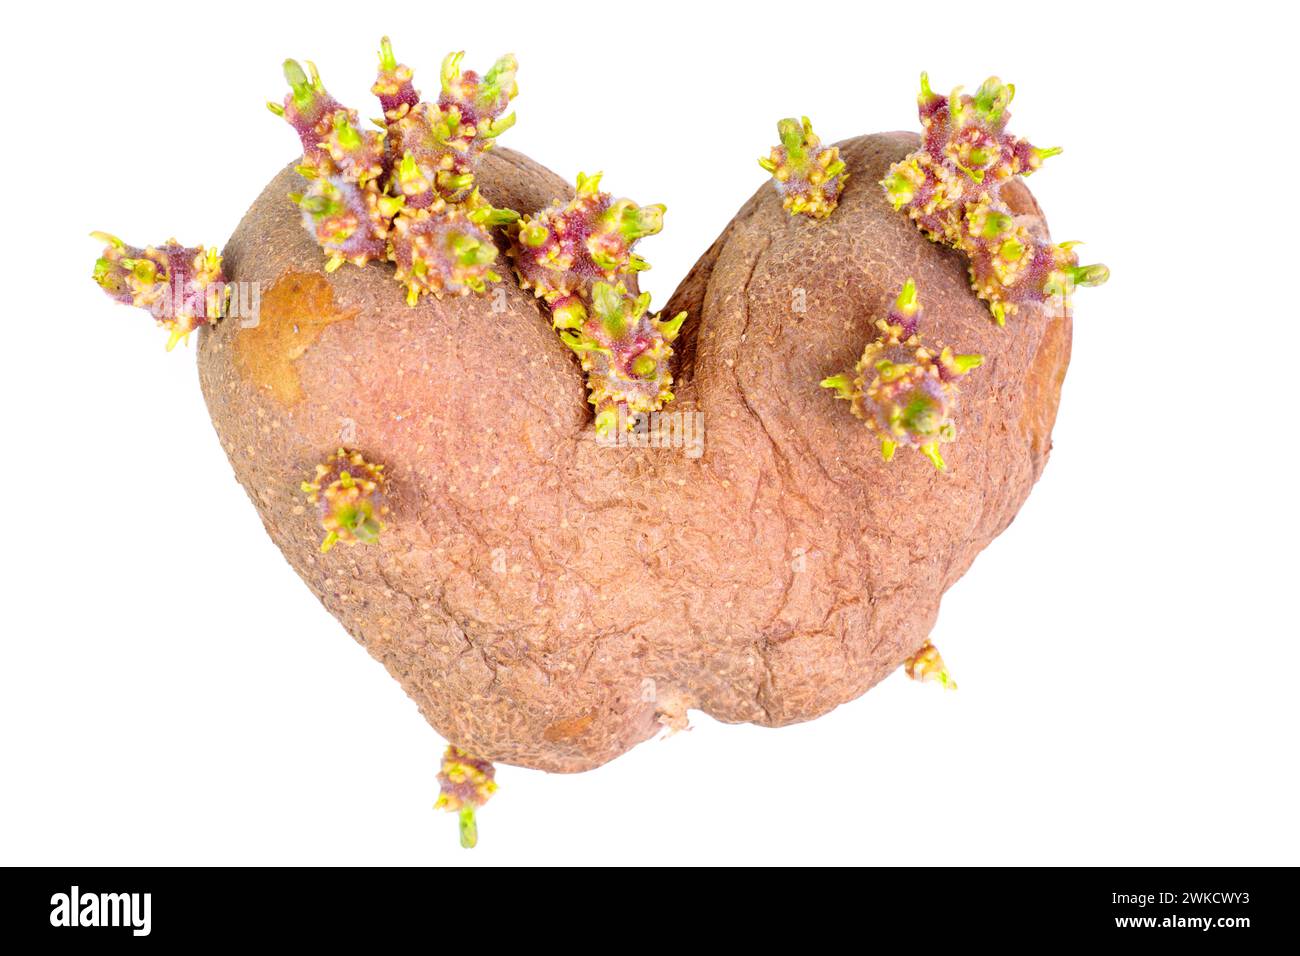 Heart-shaped potato sprouting with shoots, ready for planting, isolated on white background. Hobby, gardening, cultivation, sustainability and renewal Stock Photo